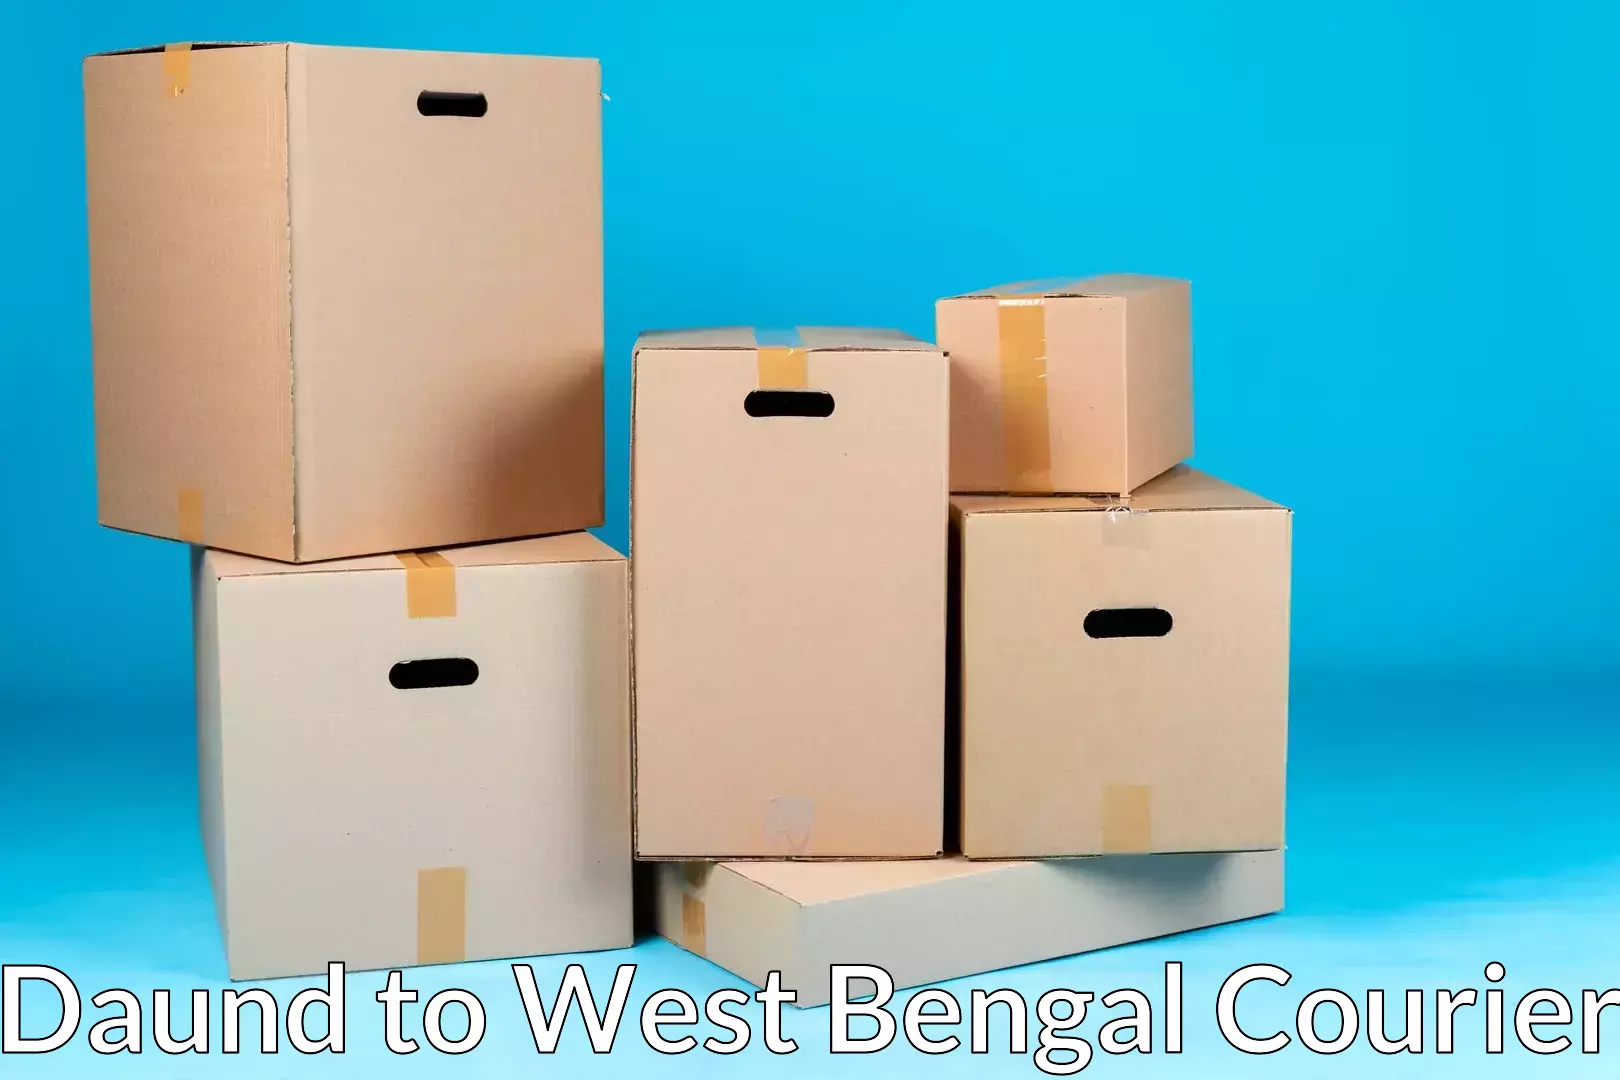 Budget-friendly movers Daund to West Bengal